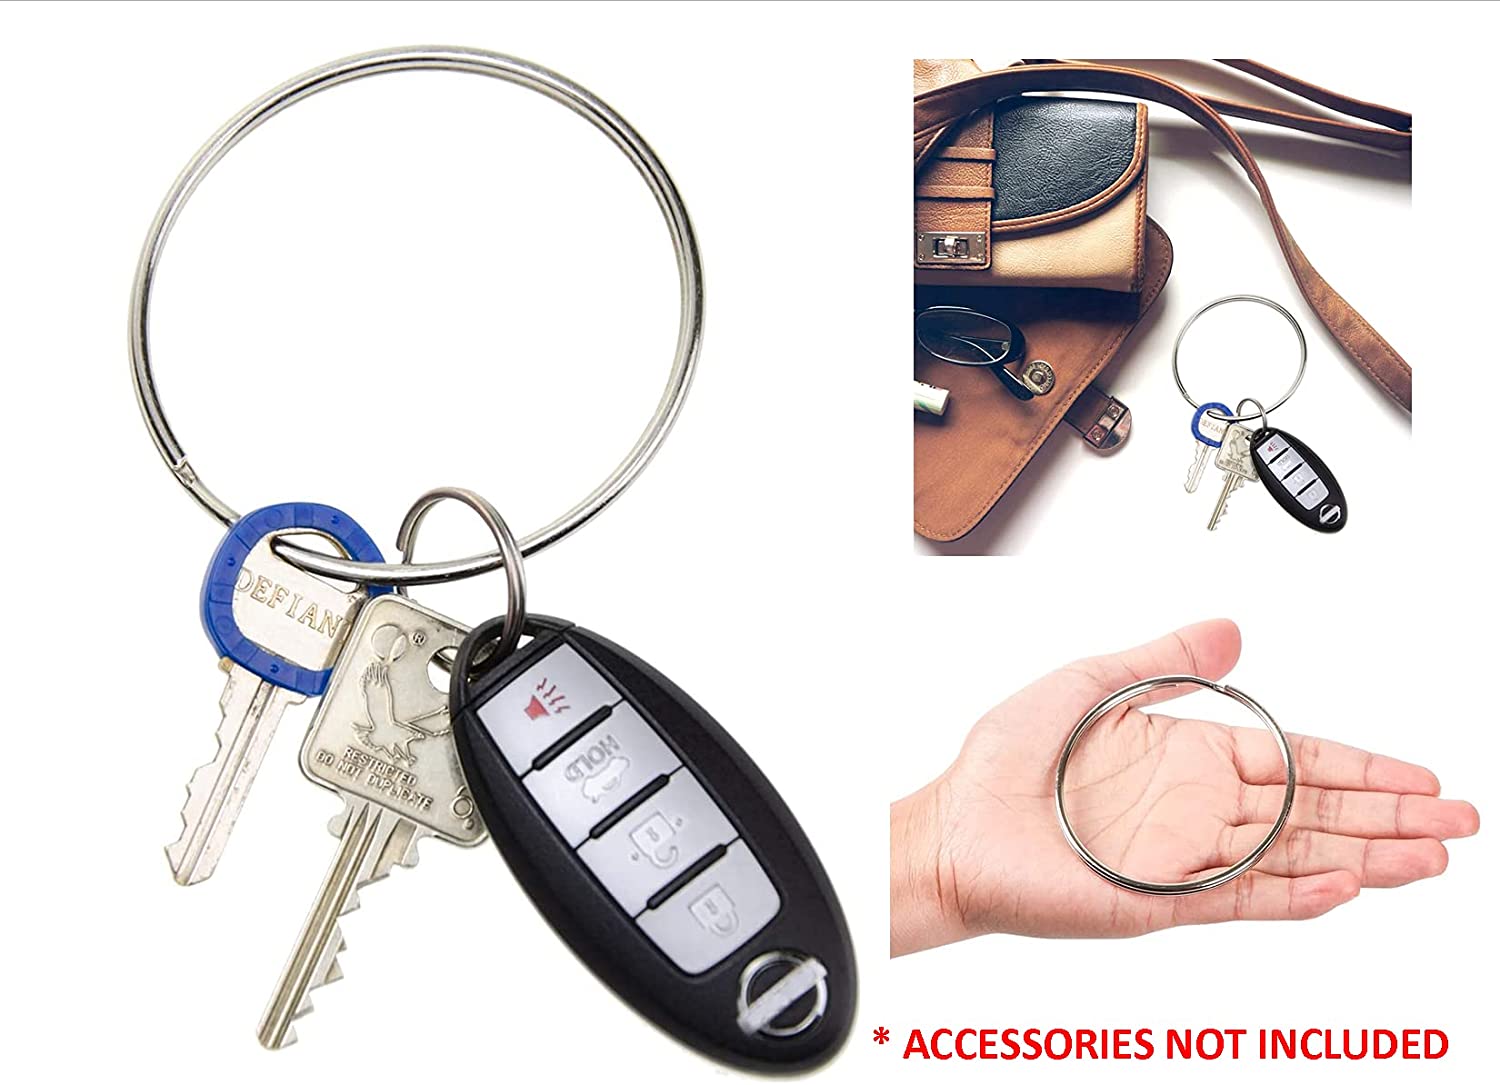 Shop for and Buy Pull Apart Janitors Key Ring 6 Inch Diameter at  . Large selection and bulk discounts available.